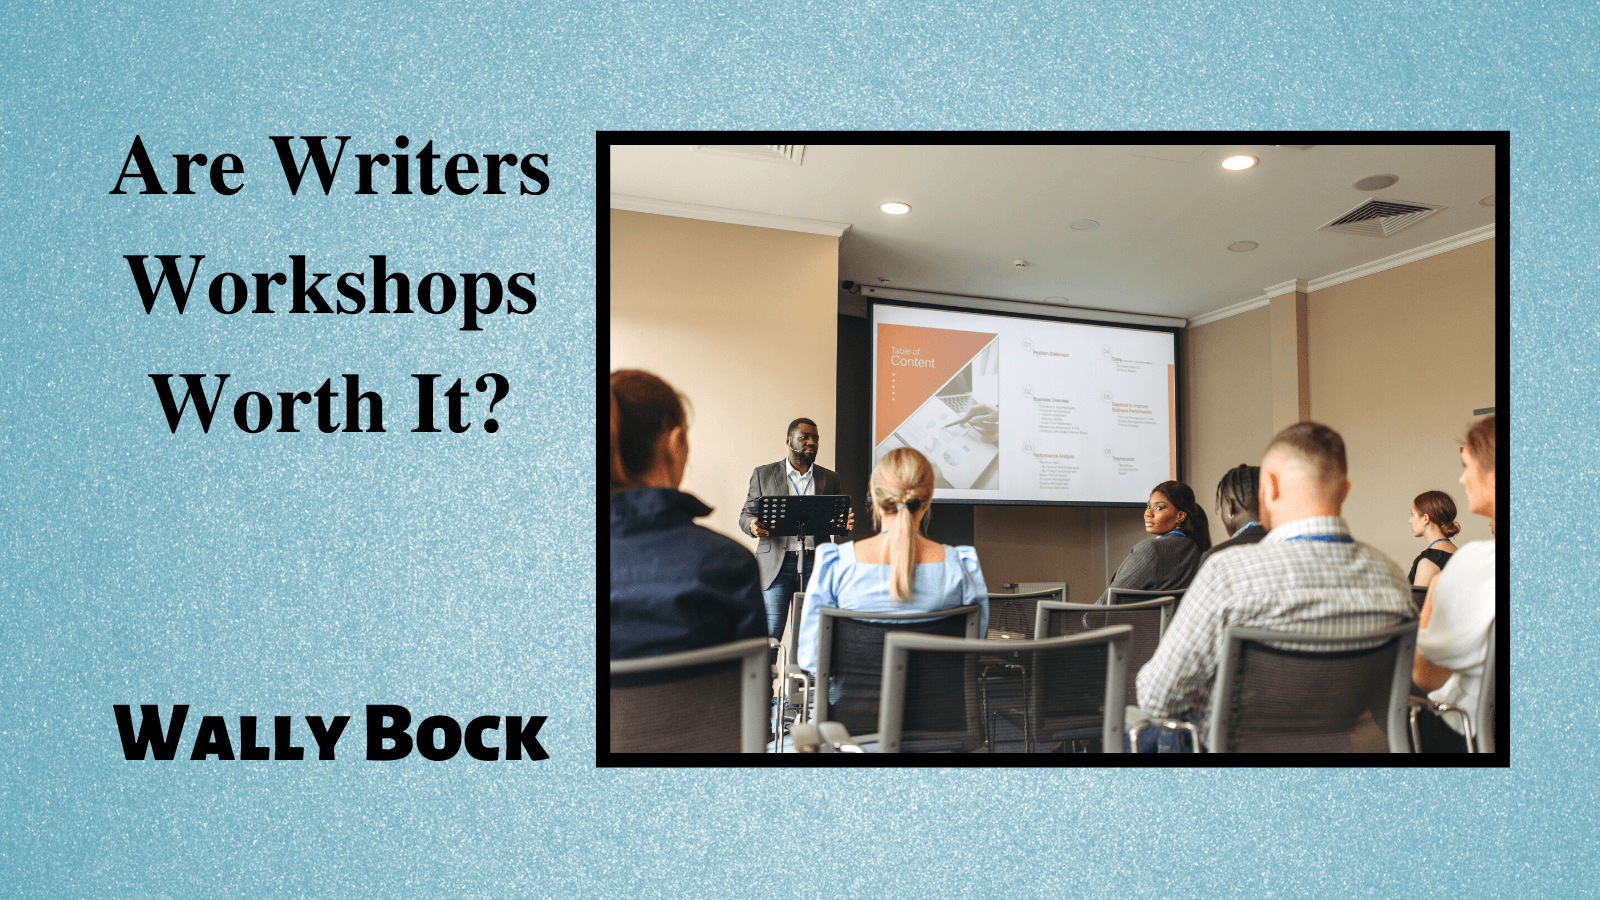 Are writers workshops worth it?